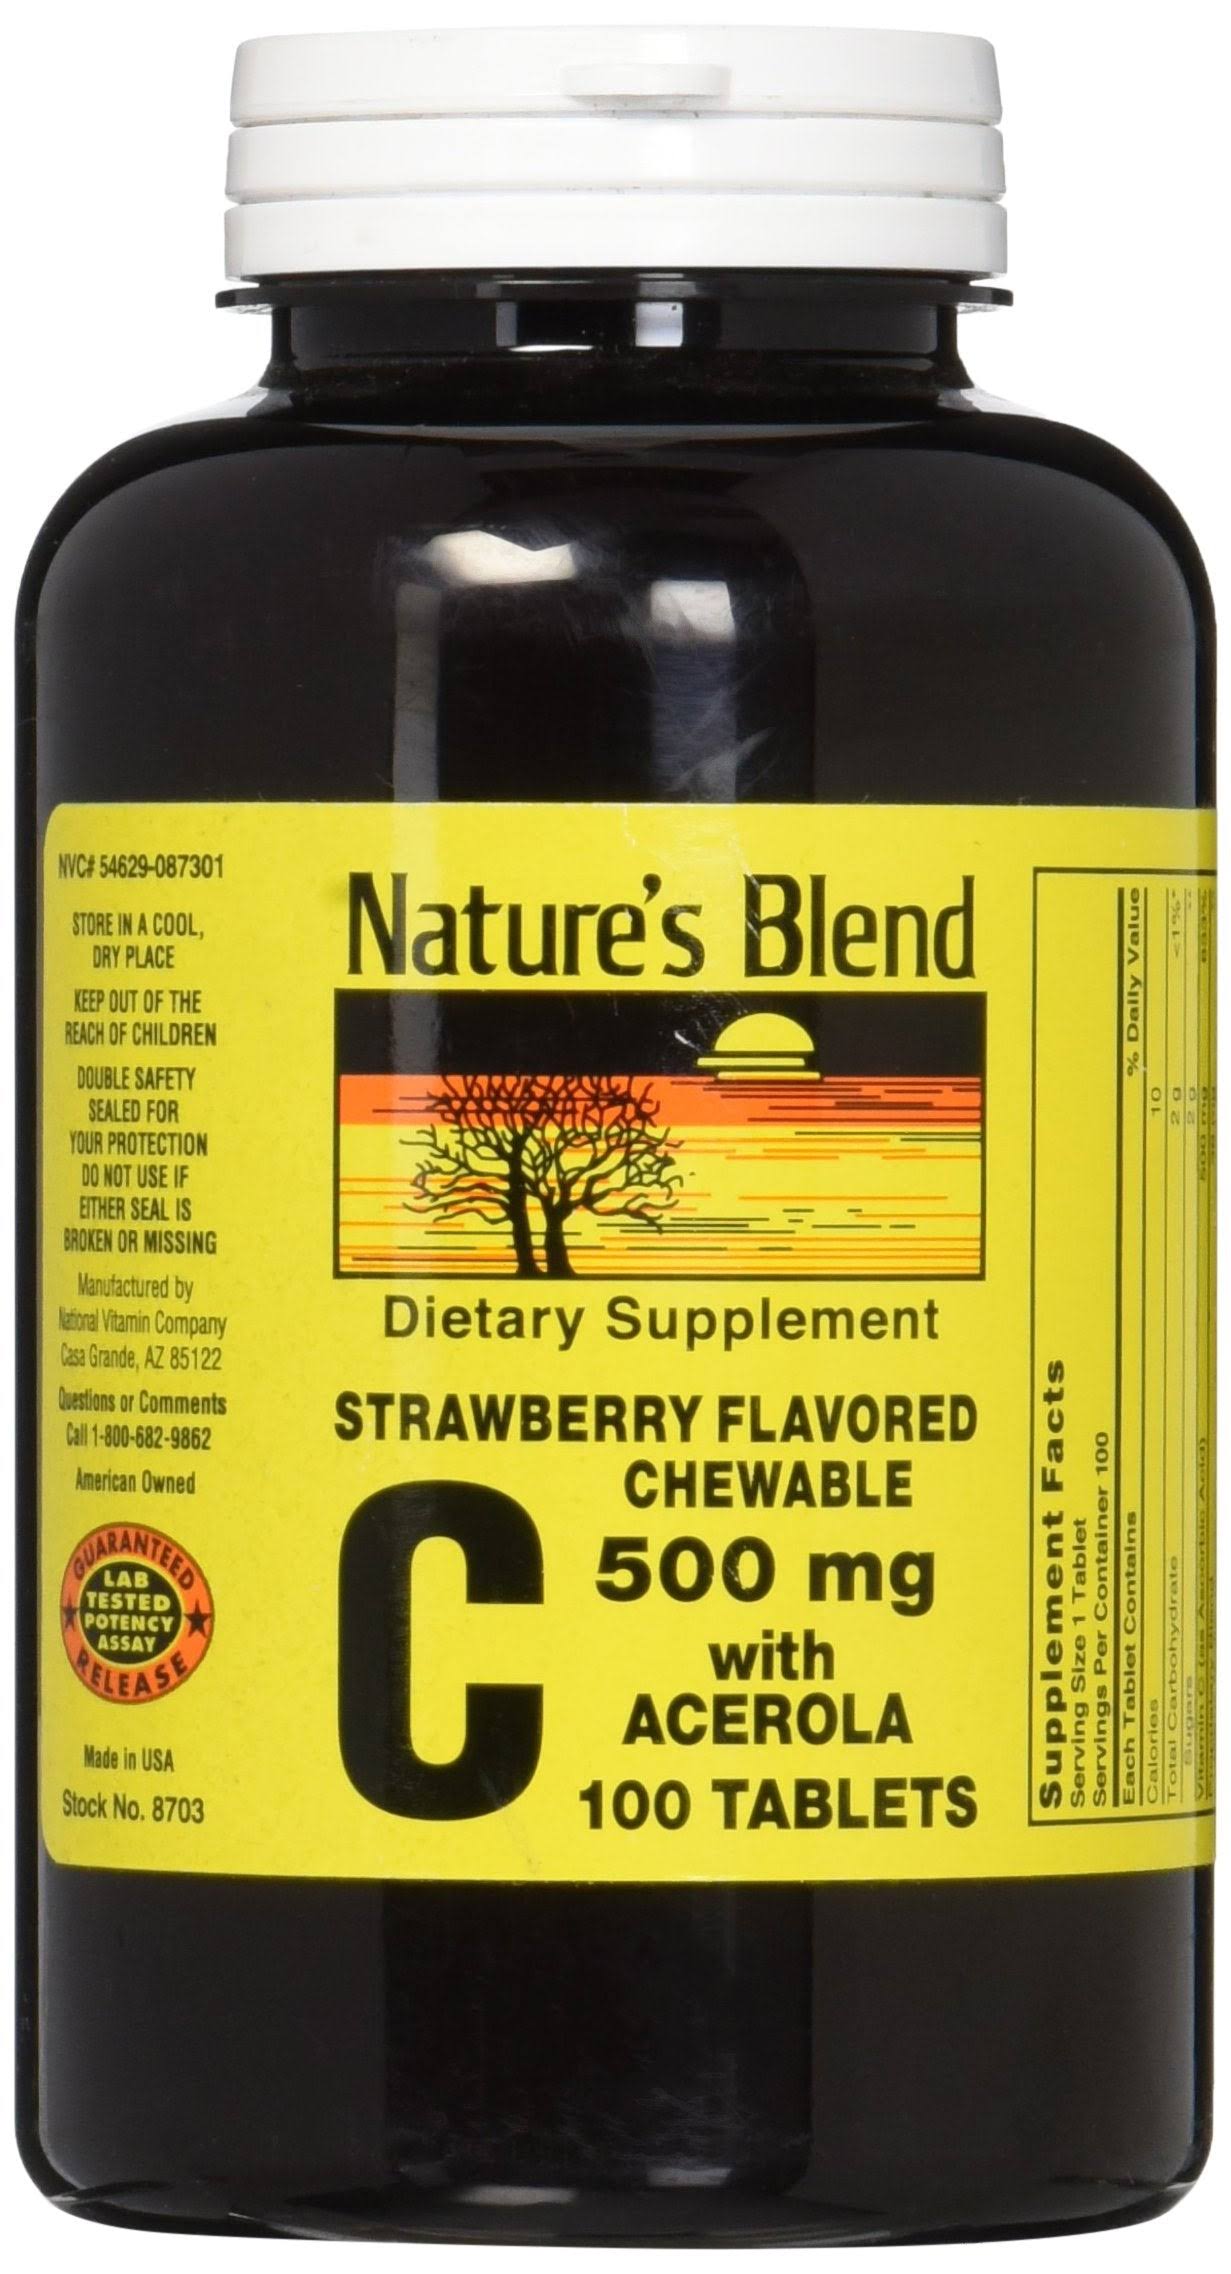 Nature's Blend Vitamin C Chewable Acerola Supplement - Strawberry, 500mg, 100ct